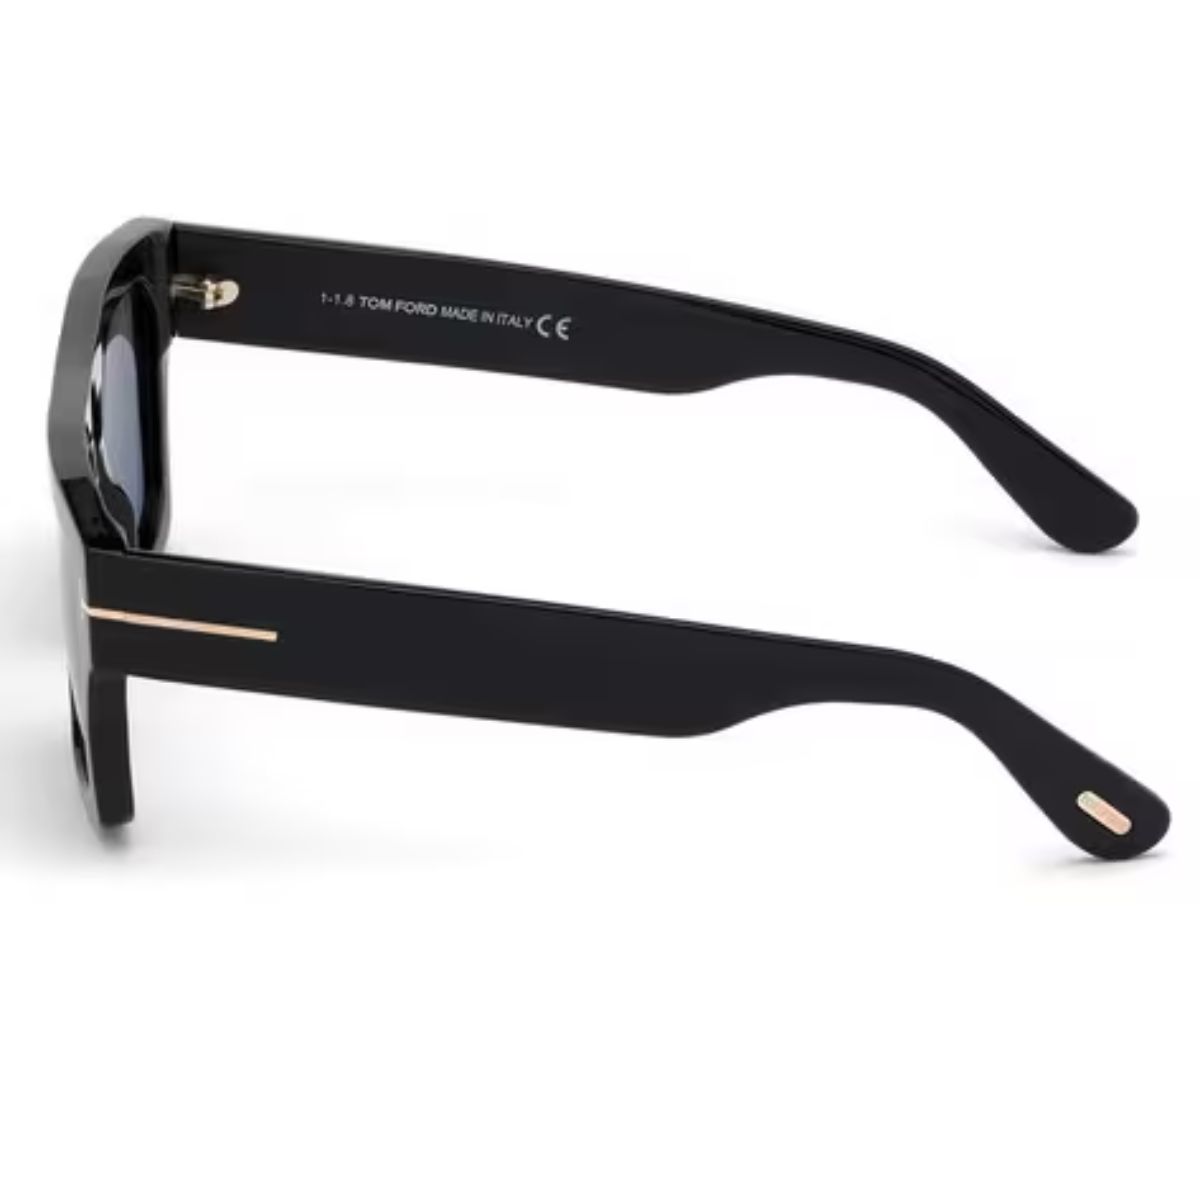 "Tom Ford 711 sunglasses in light grey lenses option, laid on a reflective surface, capturing the versatility and fashion-forward design of the eyewear."